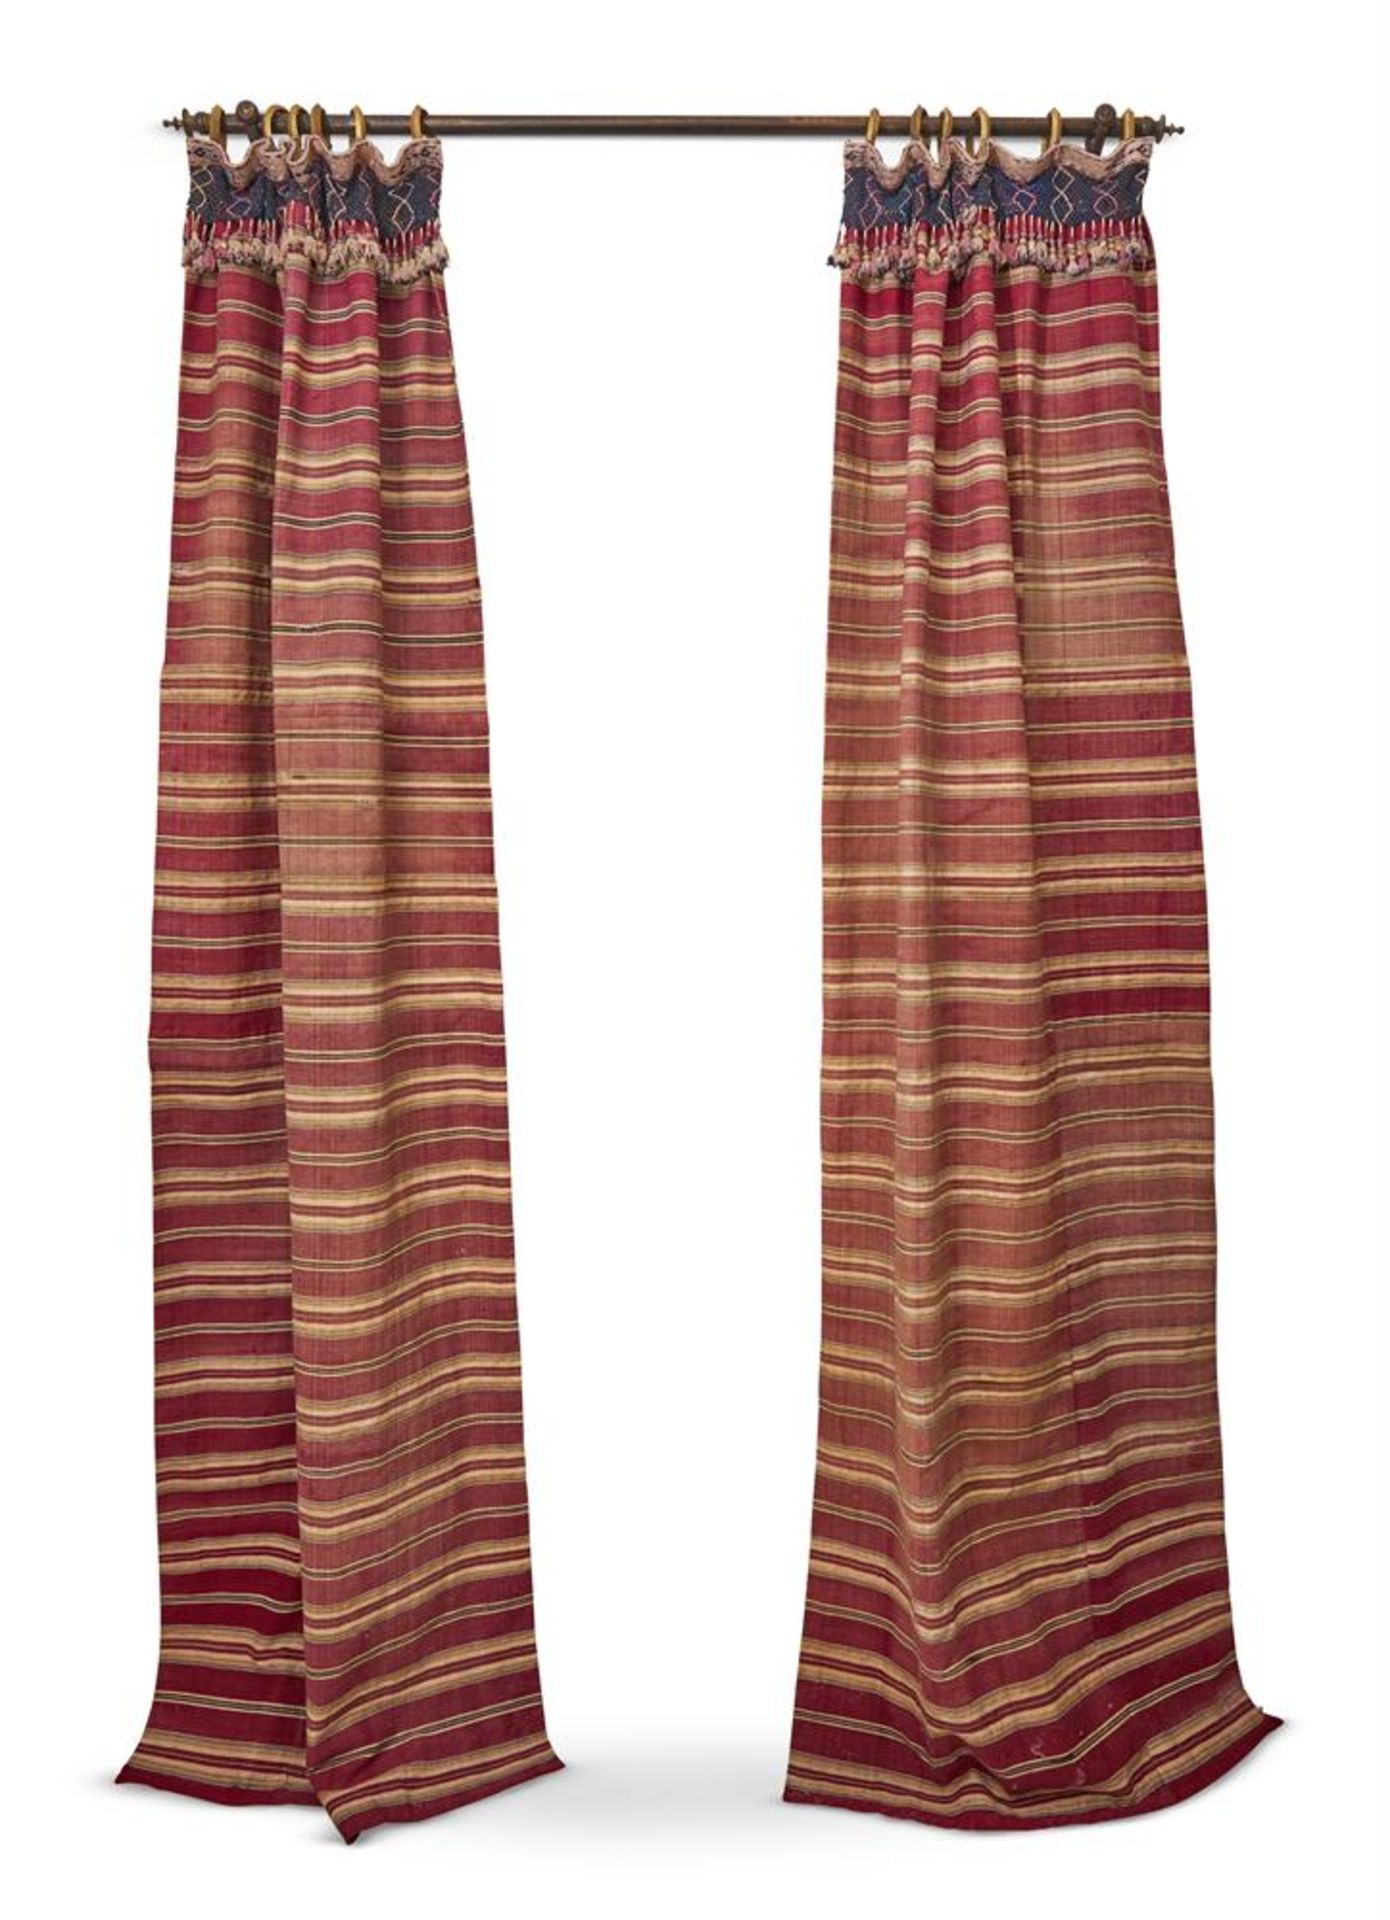 TWO PAIRS OF COTTON AND METALLIC THREAD WOVEN STRIPE CURTAINS, SYRIAN, 19TH CENTURY - Image 2 of 5